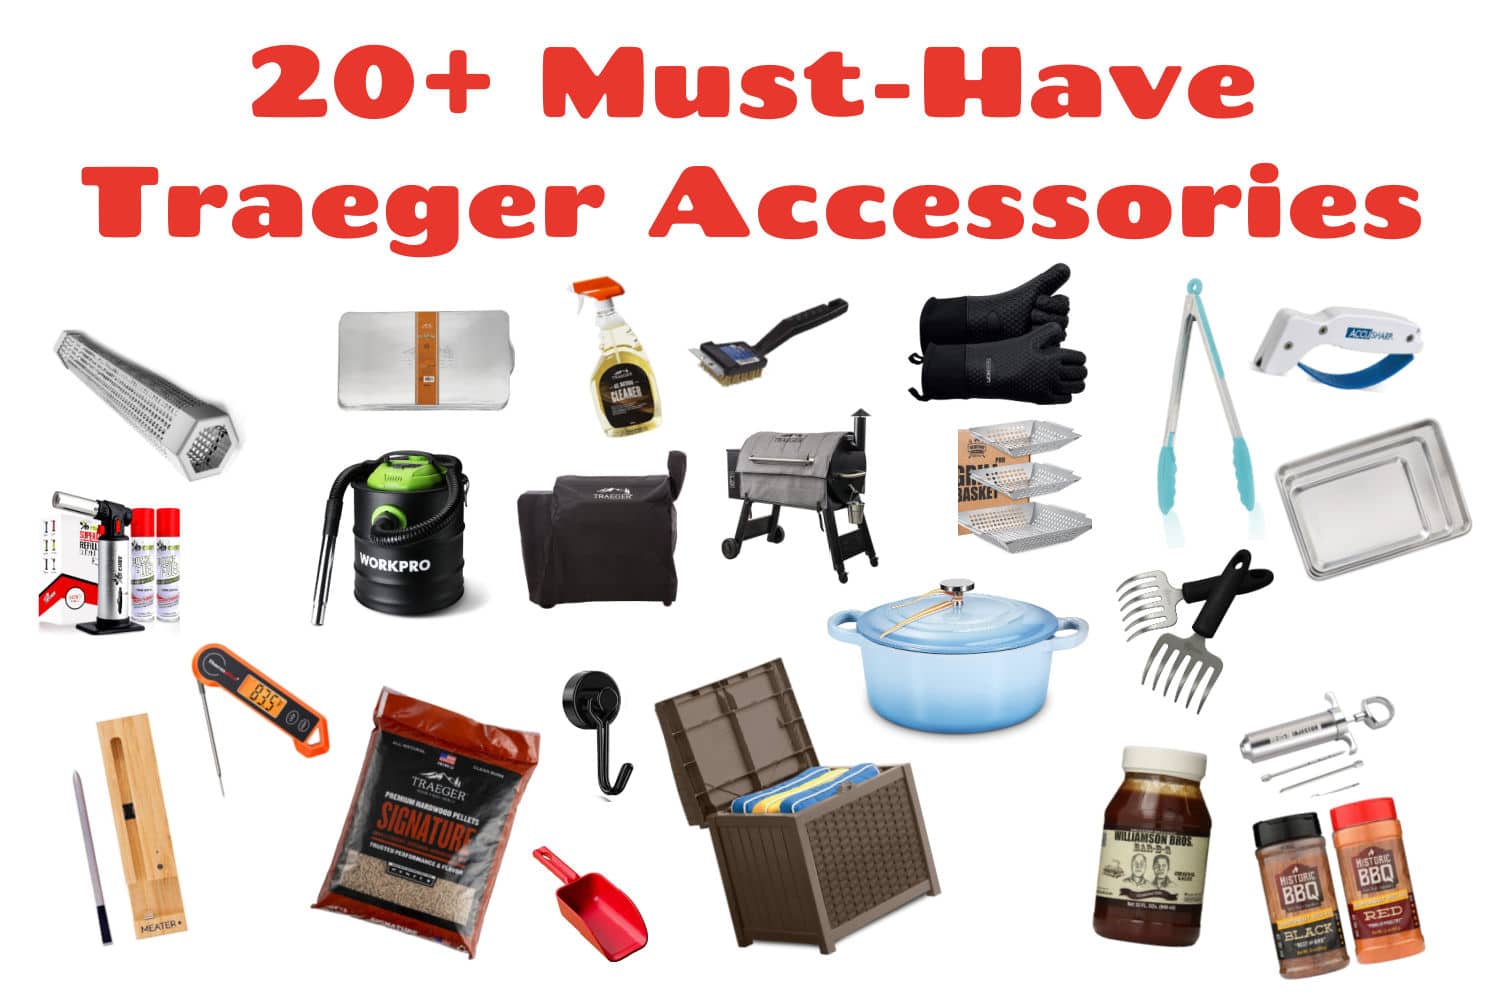 https://www.thefoodhussy.com/wp-content/uploads/2022/06/Traeger-Must-Have-Accessories-2.jpg